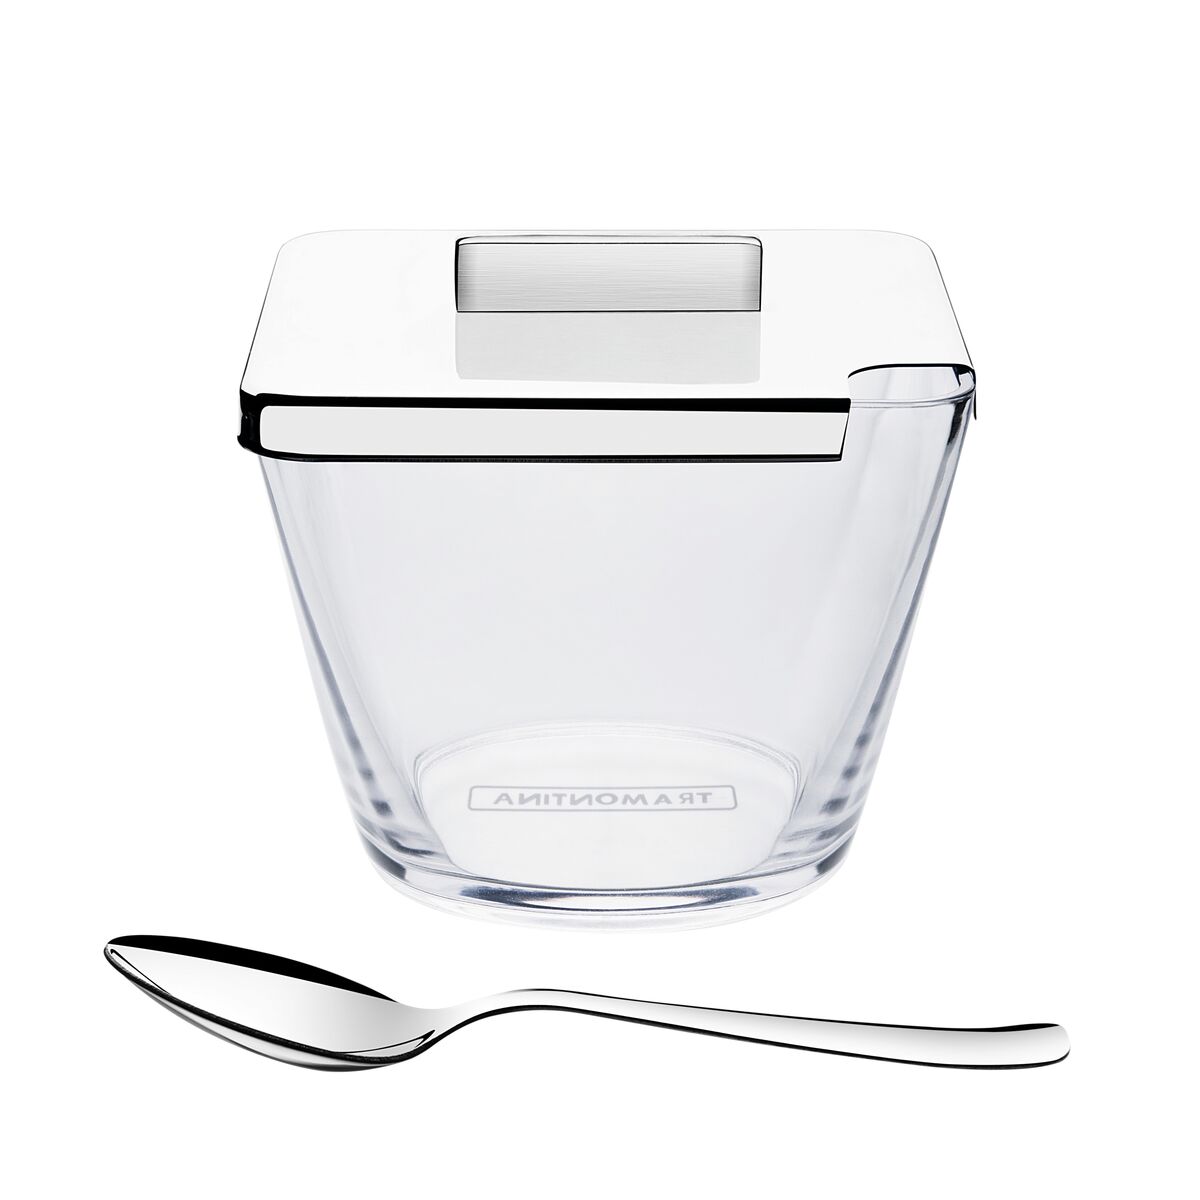 Tramontina Quadrata clear sugar bowl with stainless steel lid and spoon